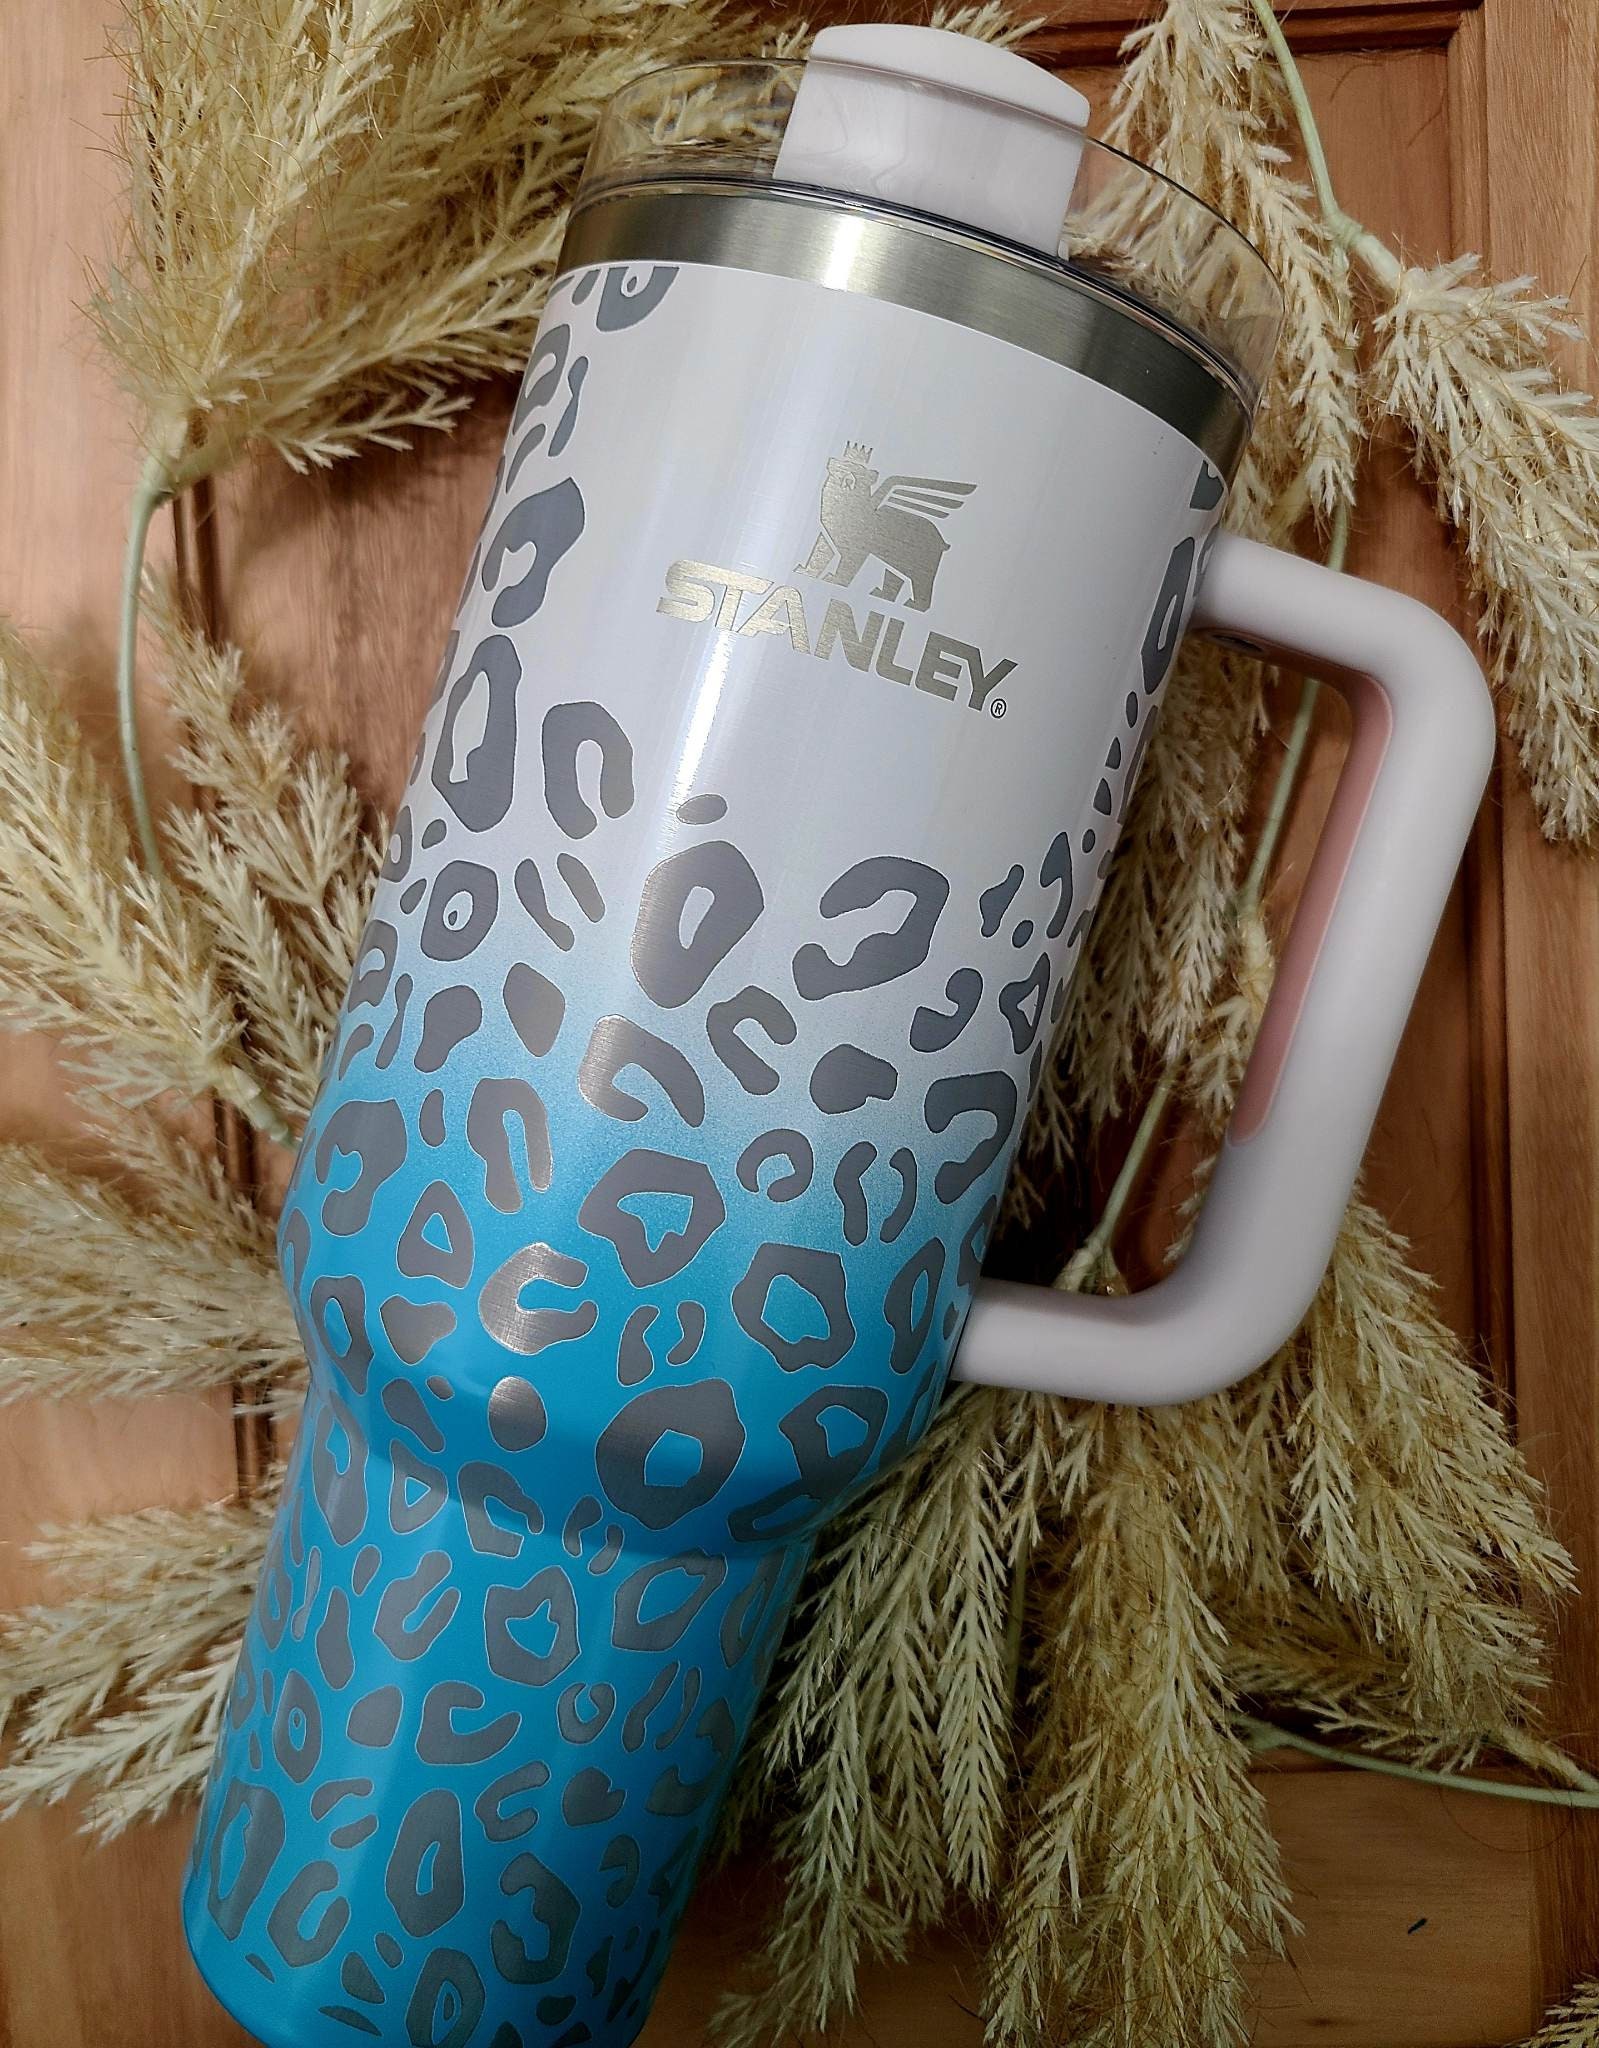 Leopard Engraved Inspired Stanley 40 Oz Cups W/straw in Stock SHIPS ASAP  See Item Description 